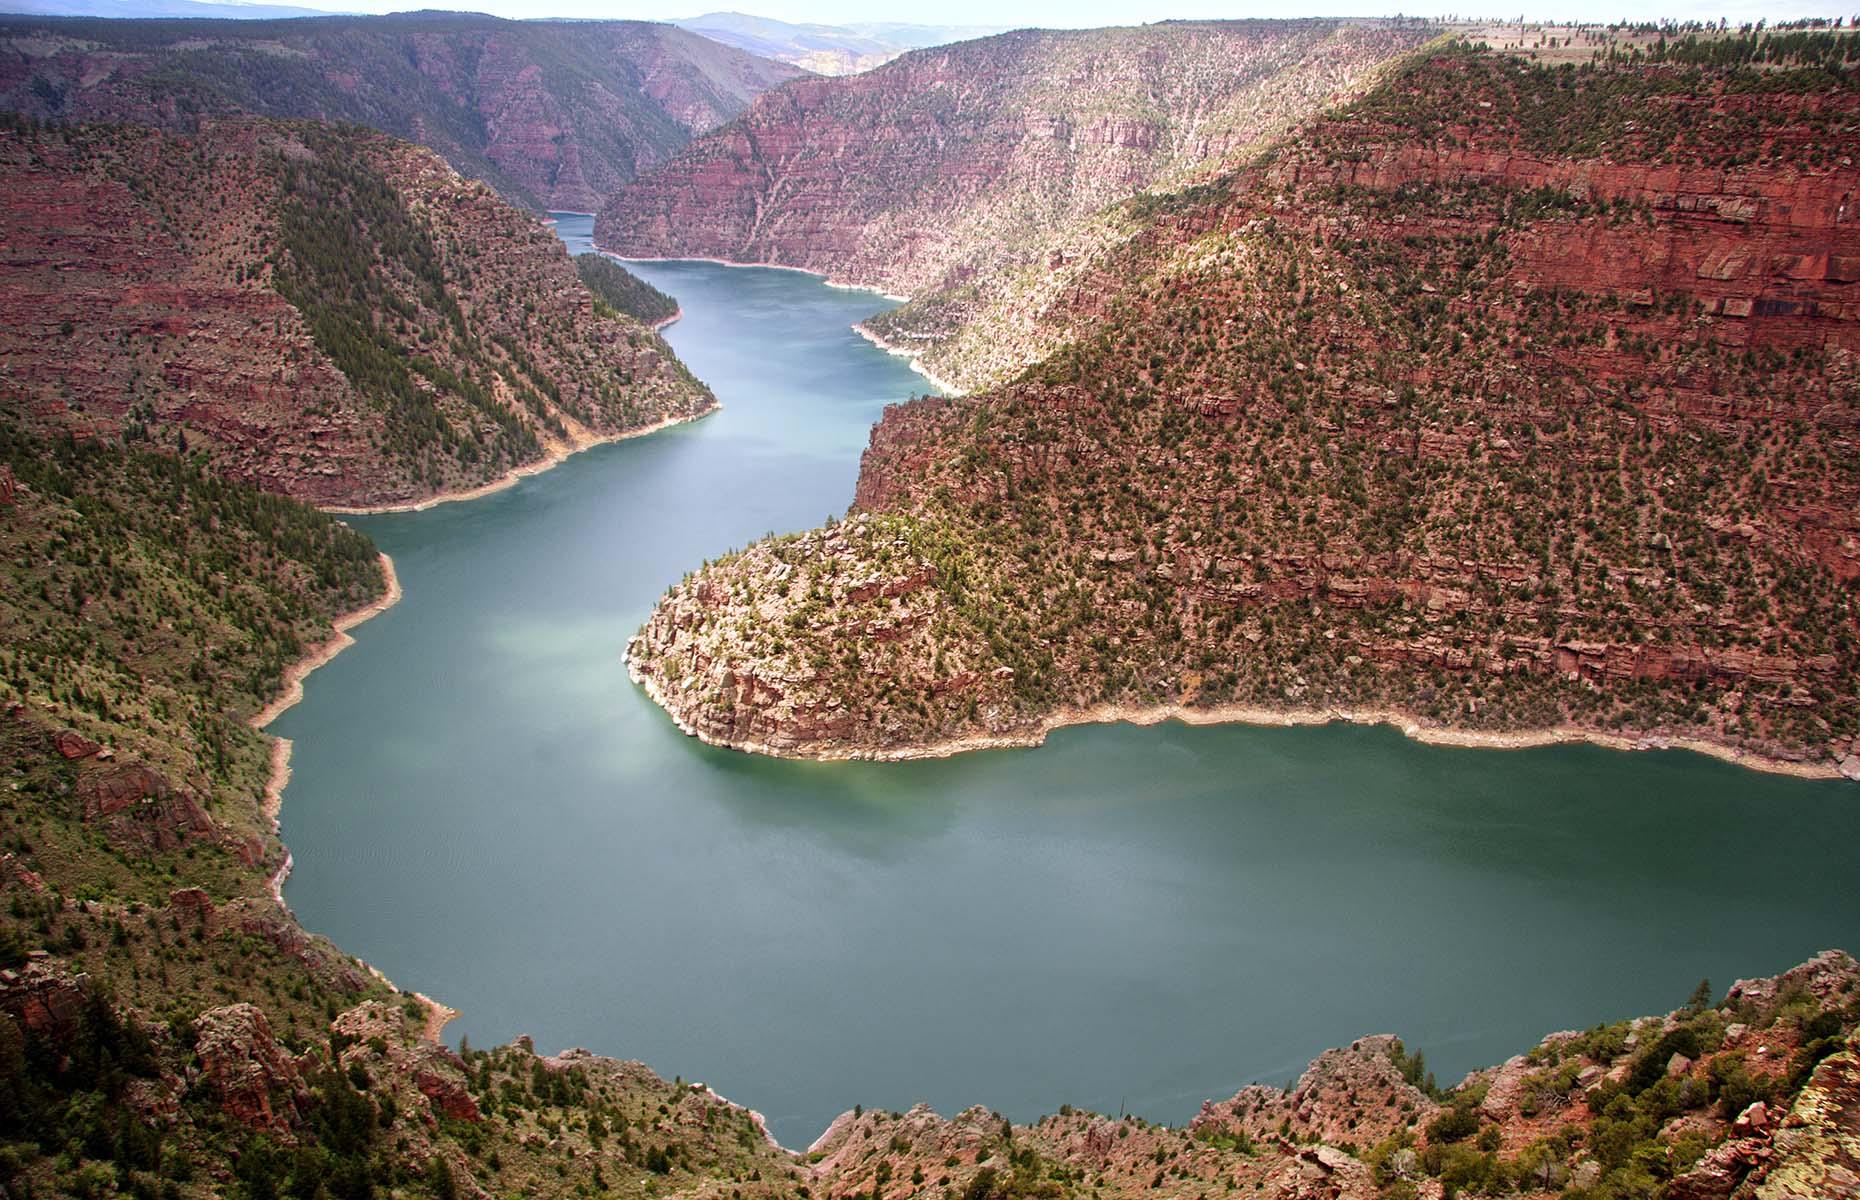 <p>Stunning rock formations, an expansive lake and abundant wildlife all await on <a href="https://www.tourwyoming.com/explore/scenic-byways/flaming-gorge-byway">this scenic drive</a> through southwestern Wyoming with a slight detour via Utah. The 150-mile (241km) drive starts in Rock Springs and mostly follows US Highway 191 south through the high desert country where untouched landscapes unfold all around. The route's namesake, Flaming Gorge Reservoir (pictured), is an exceptional area for recreation, especially trophy fishing. Visitors shouldn't miss spotting the wild horses roaming the Red Desert either.</p>